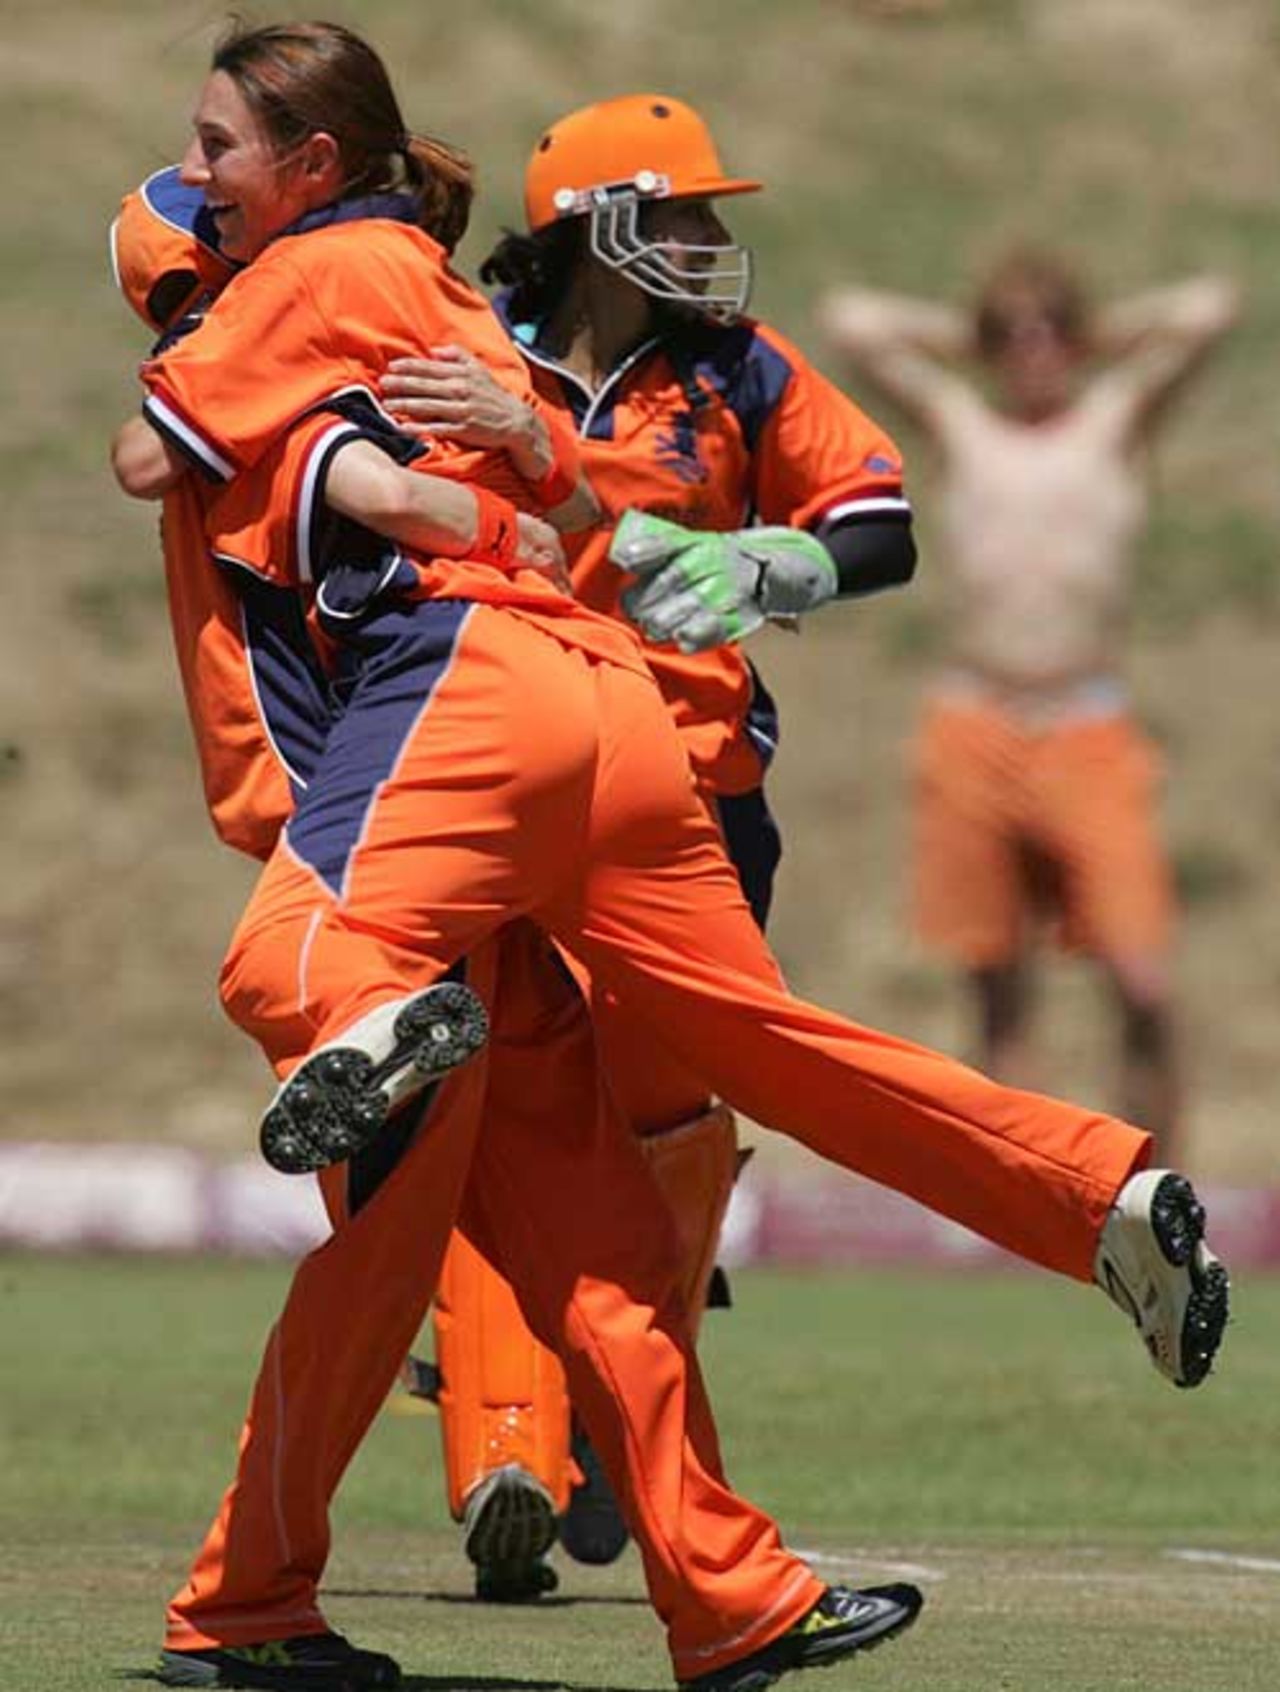 Lotte Egging celebrates one of her three wickets against Pakistan, Pakistan v Netherlands, ICC Women's World Cup Qualifiers semi-final, Stellenbosch, February 22, 2008